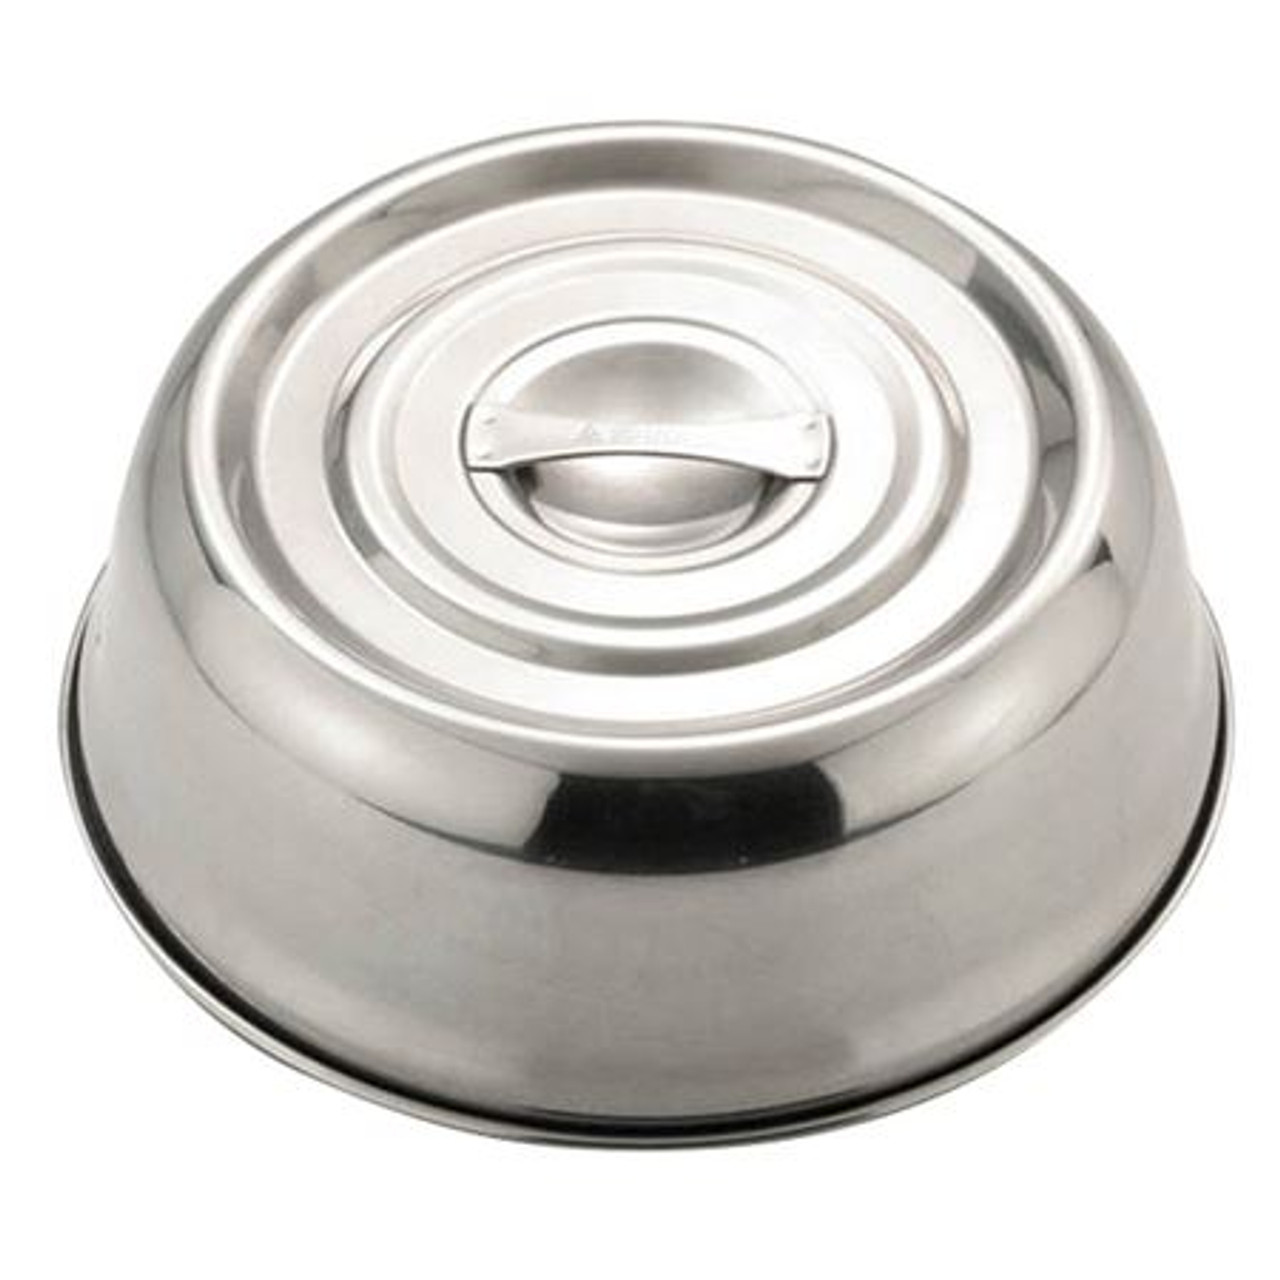 Sunnex Plate Covers Stainless Steel